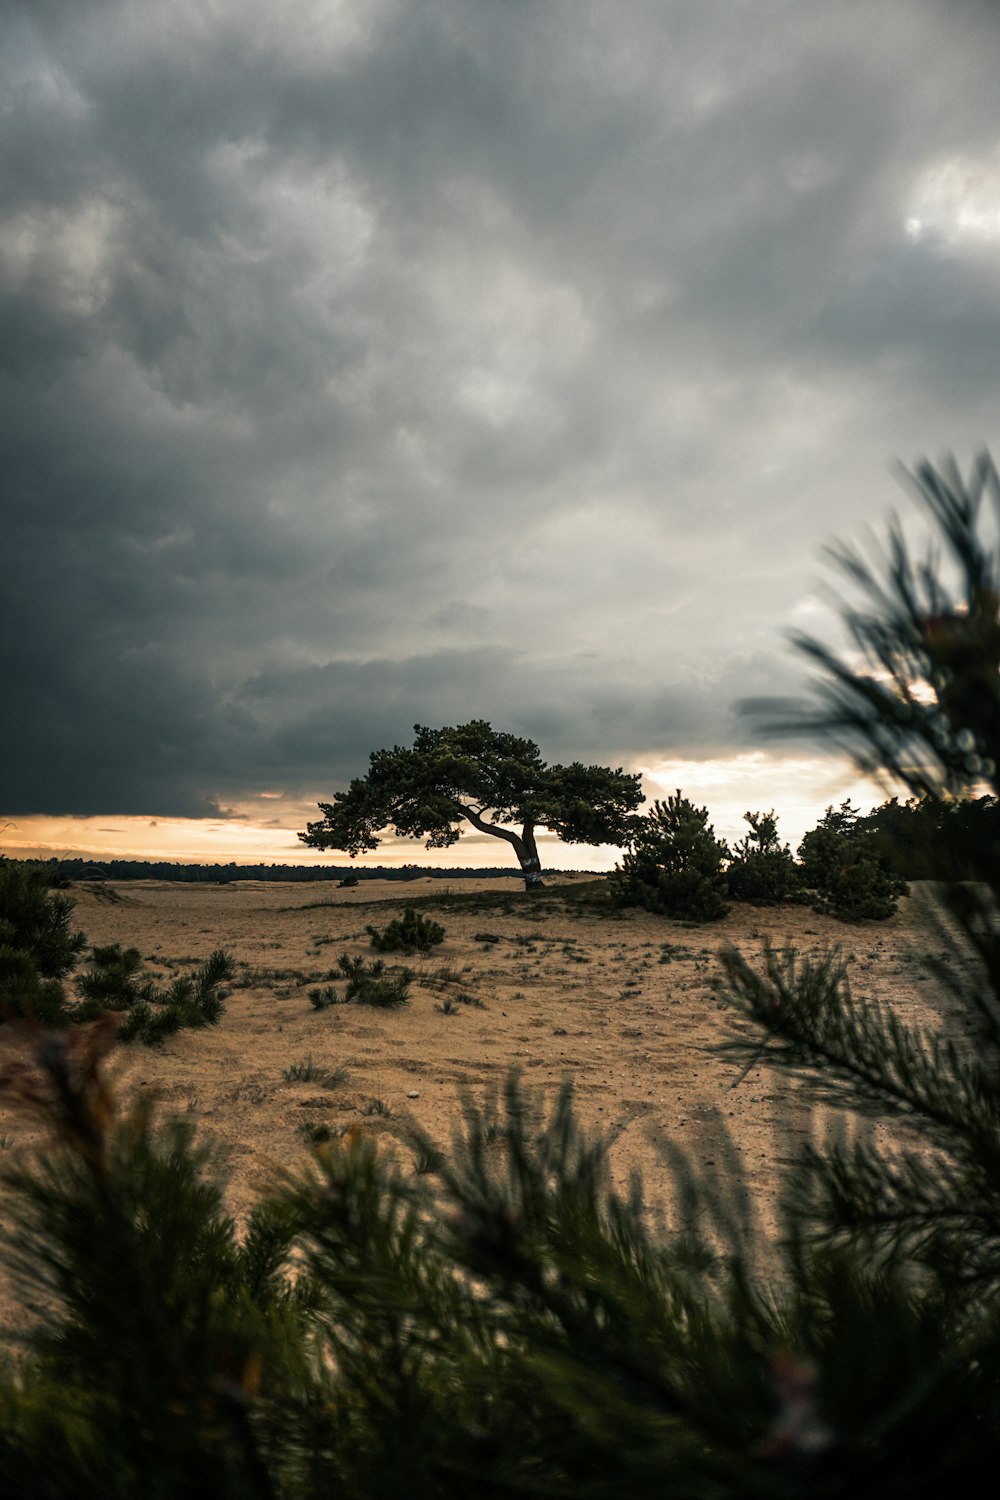 green trees on brown sand under gray cloudy sky